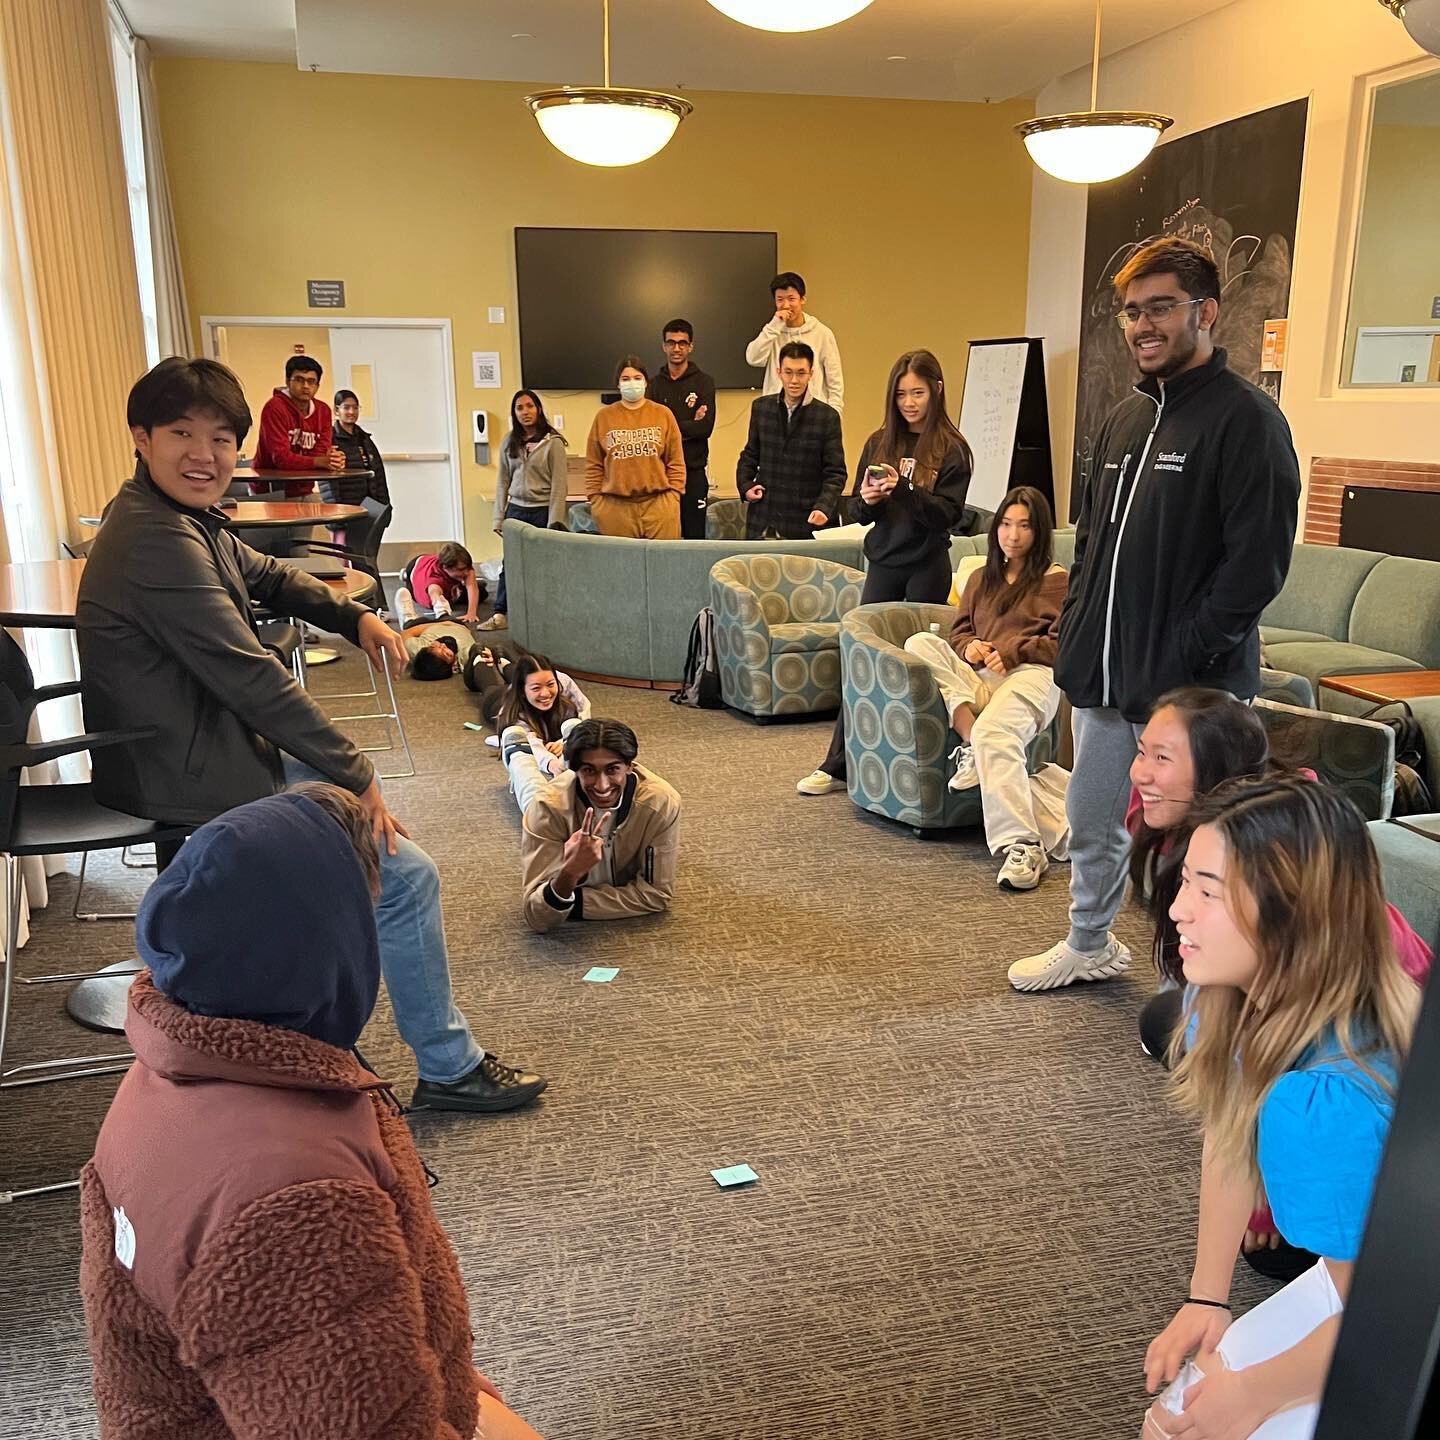 We&rsquo;ve selected 30 amazing freshman for our Frosh Battalion 2023 cohort! Their majors range from Design, Economics, Psychology, CS, MS&amp;E, and many more&mdash;pictured is our second meeting: Risk Taking Game.

Each team tried to throw a ball 